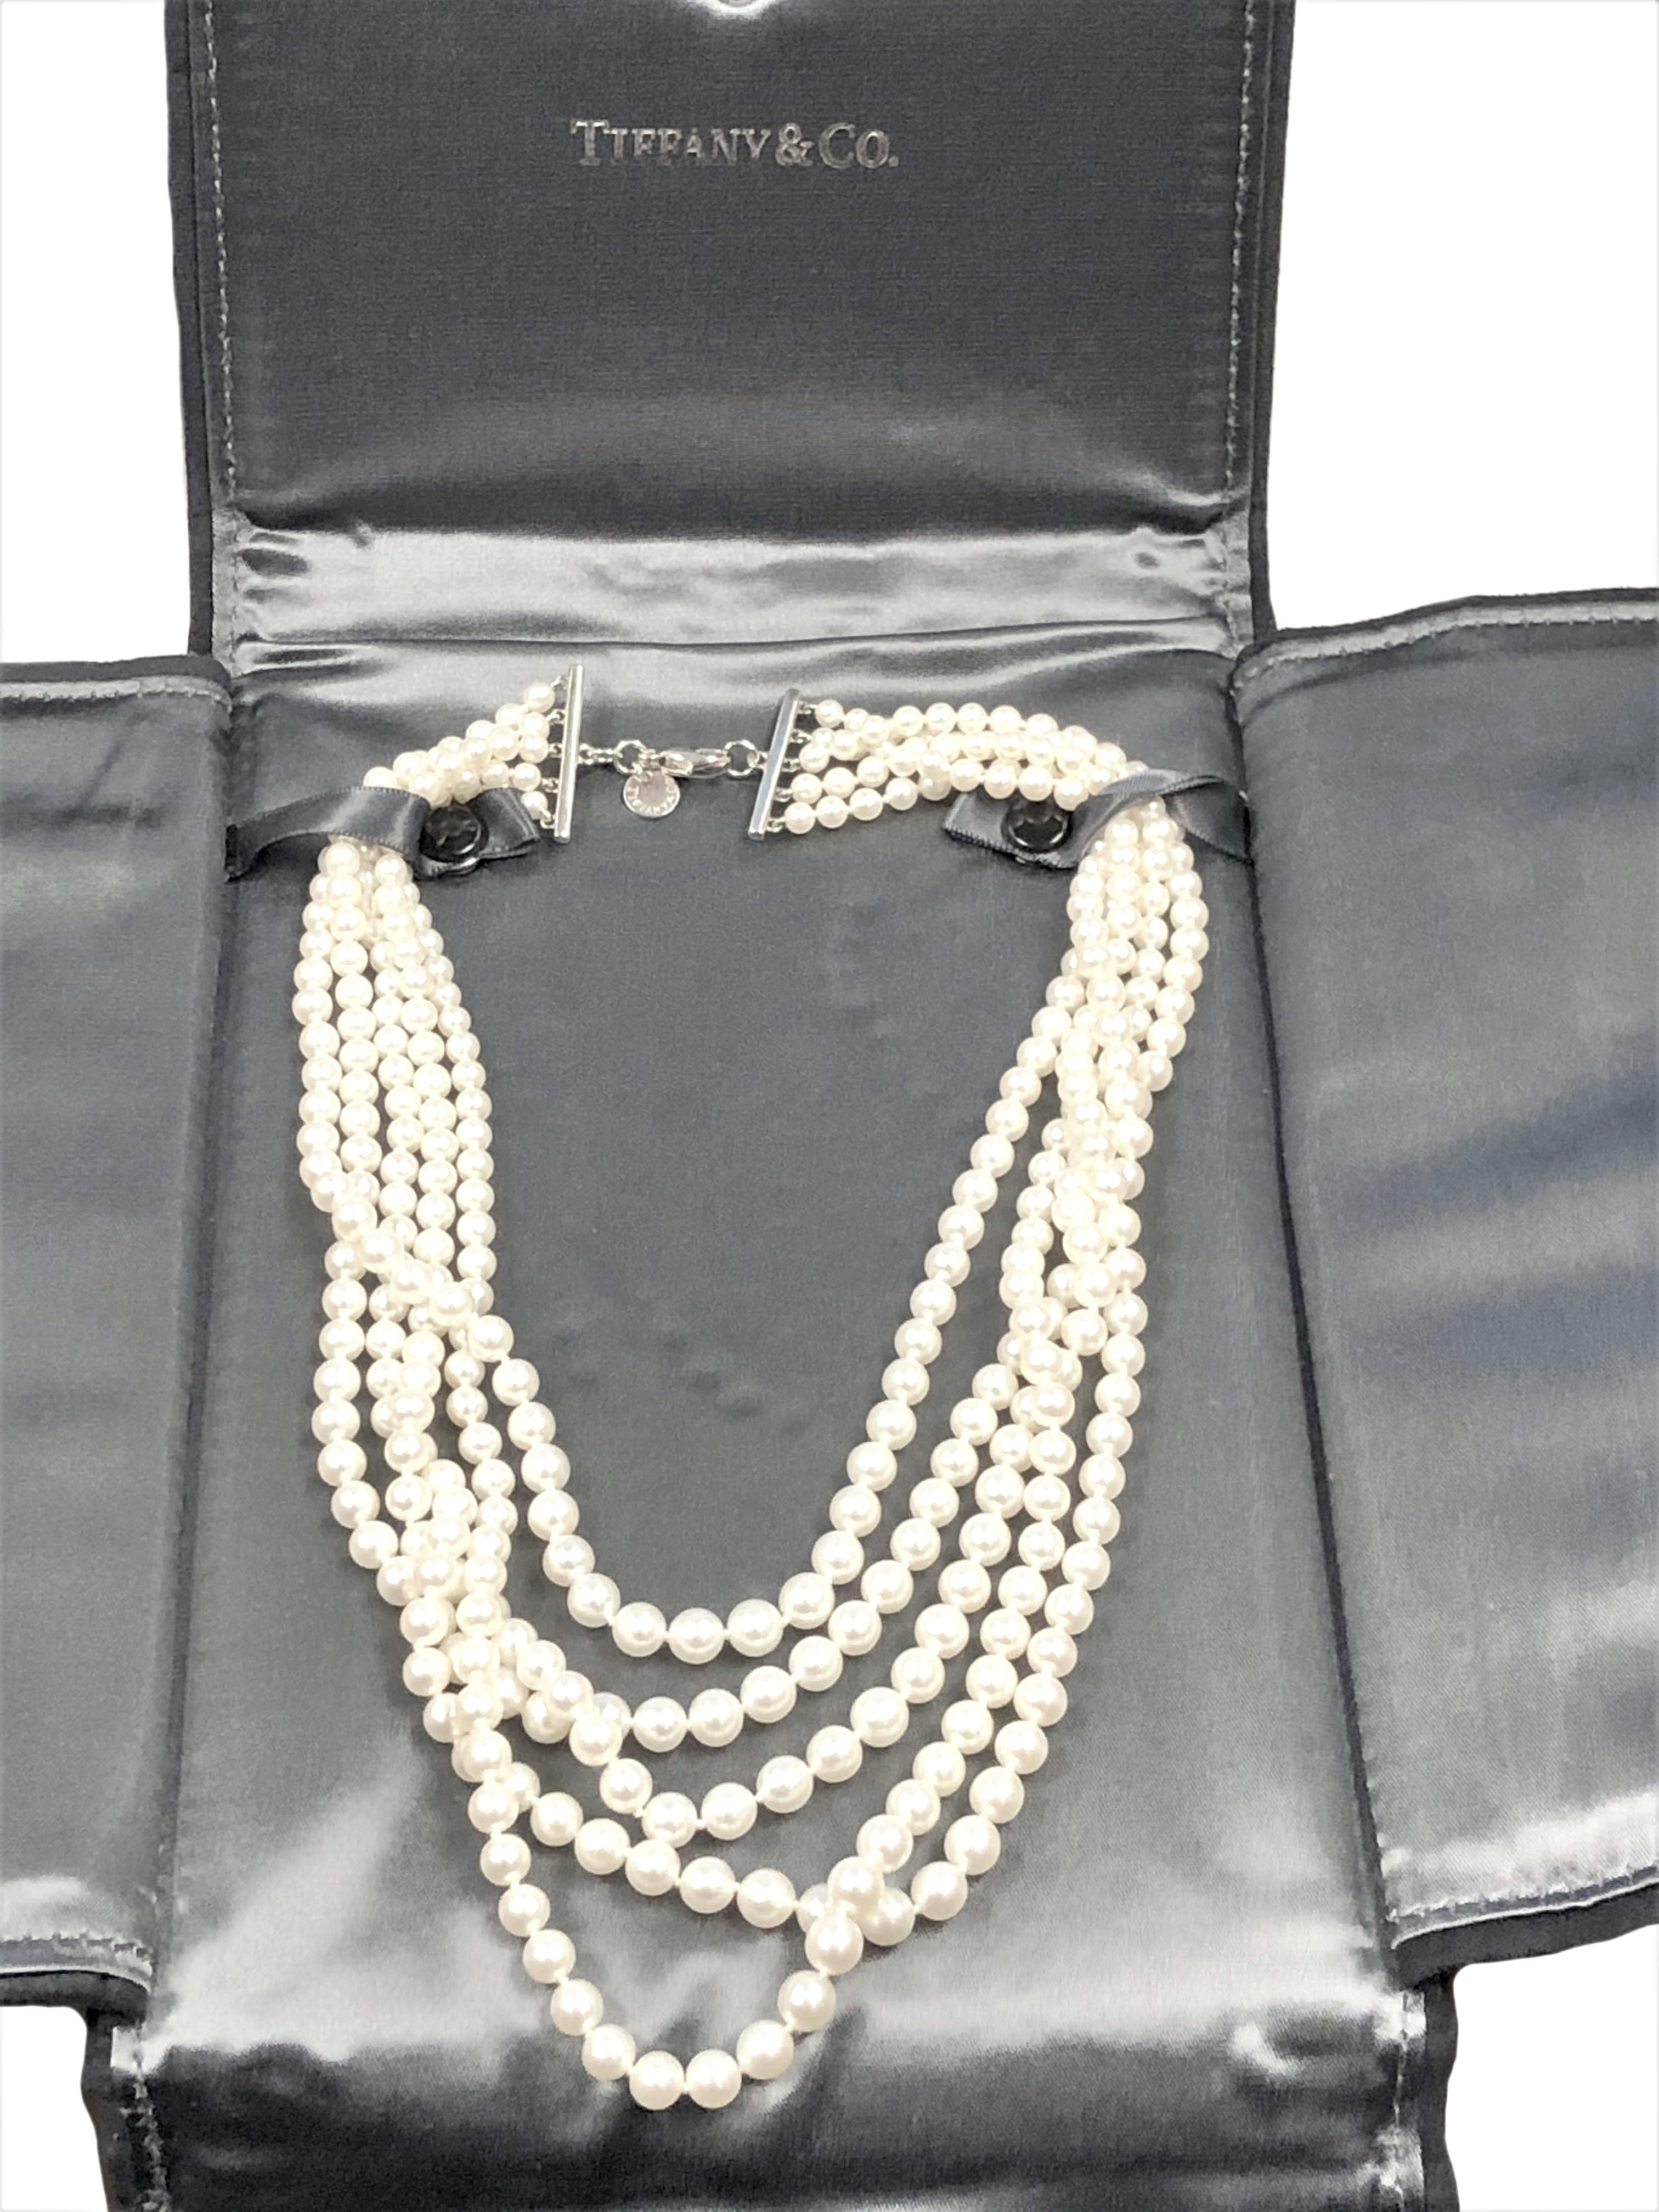 Circa 2018 Tiffany & Company 5 Strand Layered and Graduating Necklace. Comprised of Graduating Strands of 4 M.M. to 6.5 M.M. Culture pearls that are Very Fine Round and Very Fine White Luster with a Hint of Pink Grading as AAA with no surface